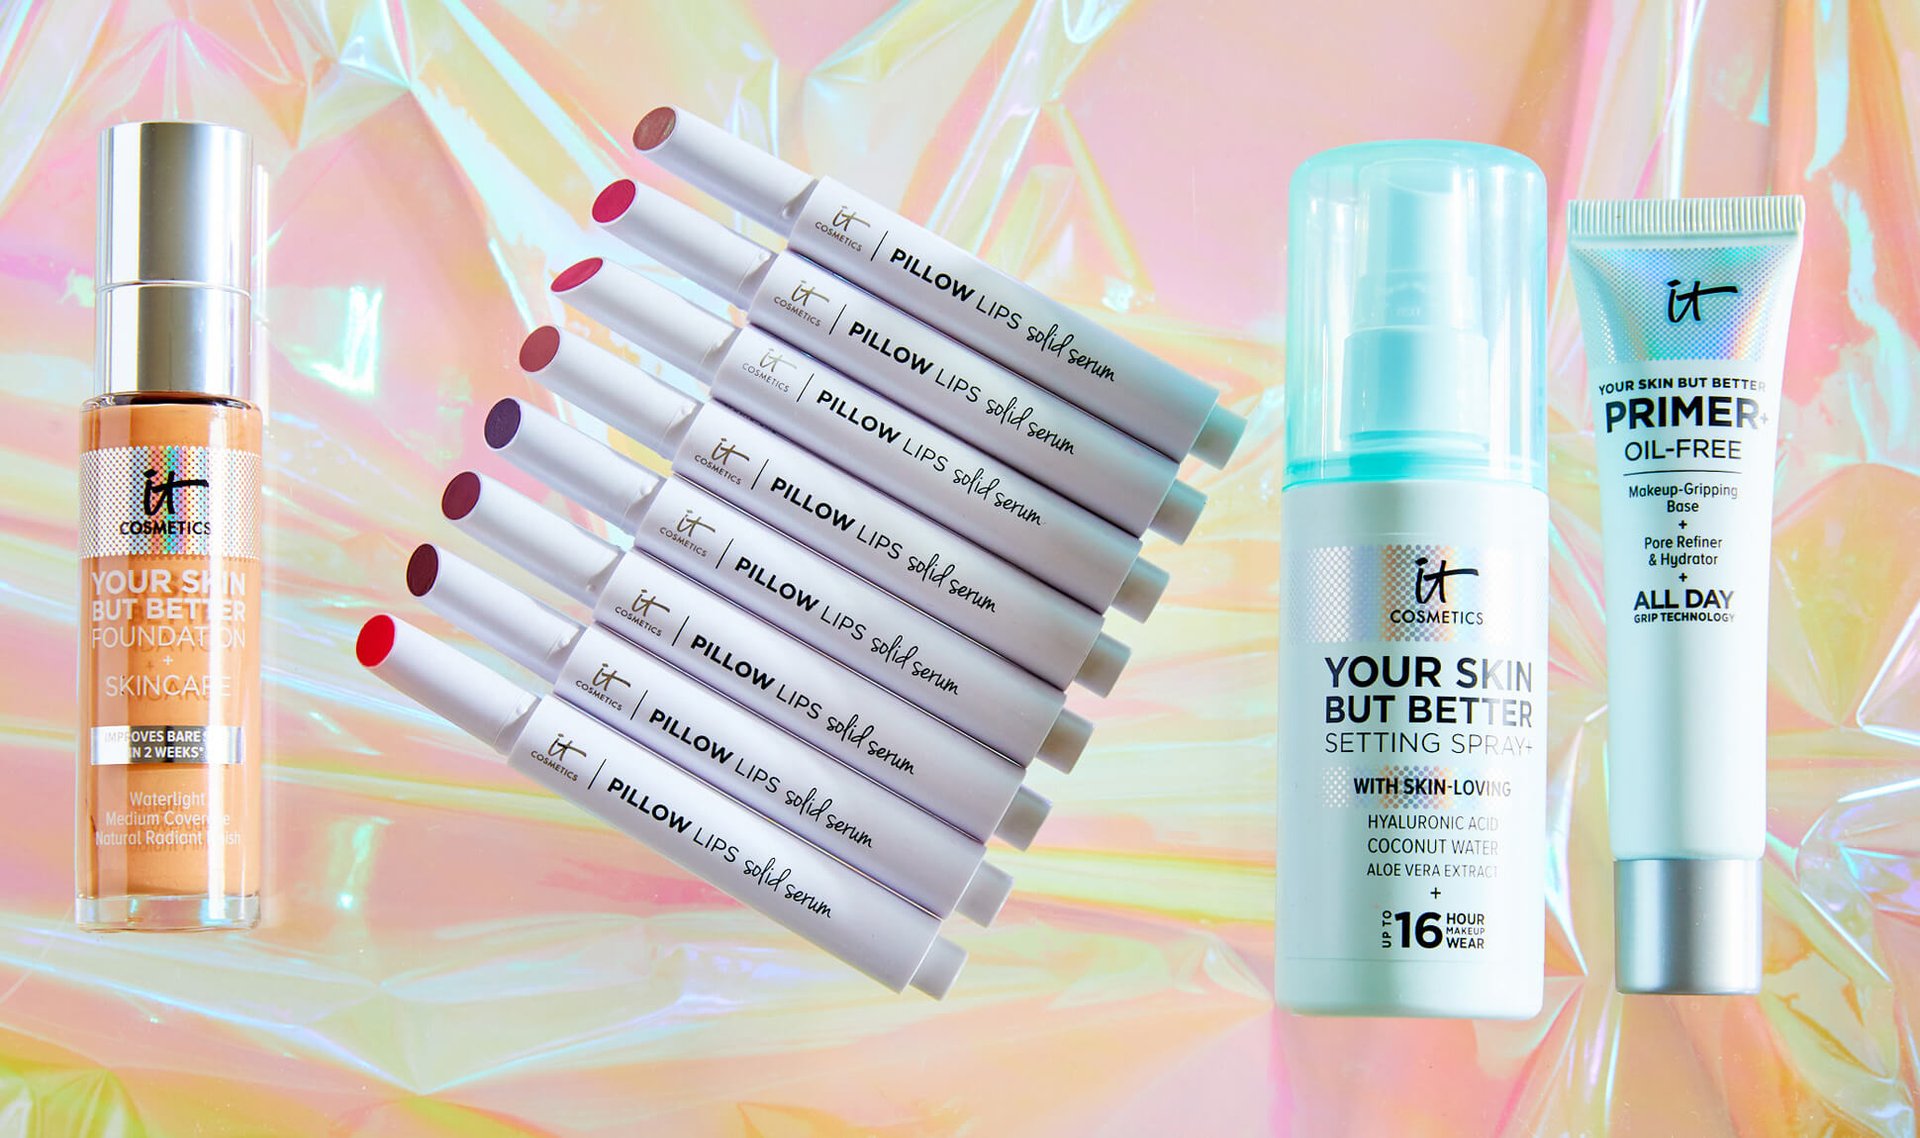 Win the Ultimate Makeup-Meets-Skin-Care Package From IT Cosmetics — Including the New Pillow Lips Solid Serum Gloss